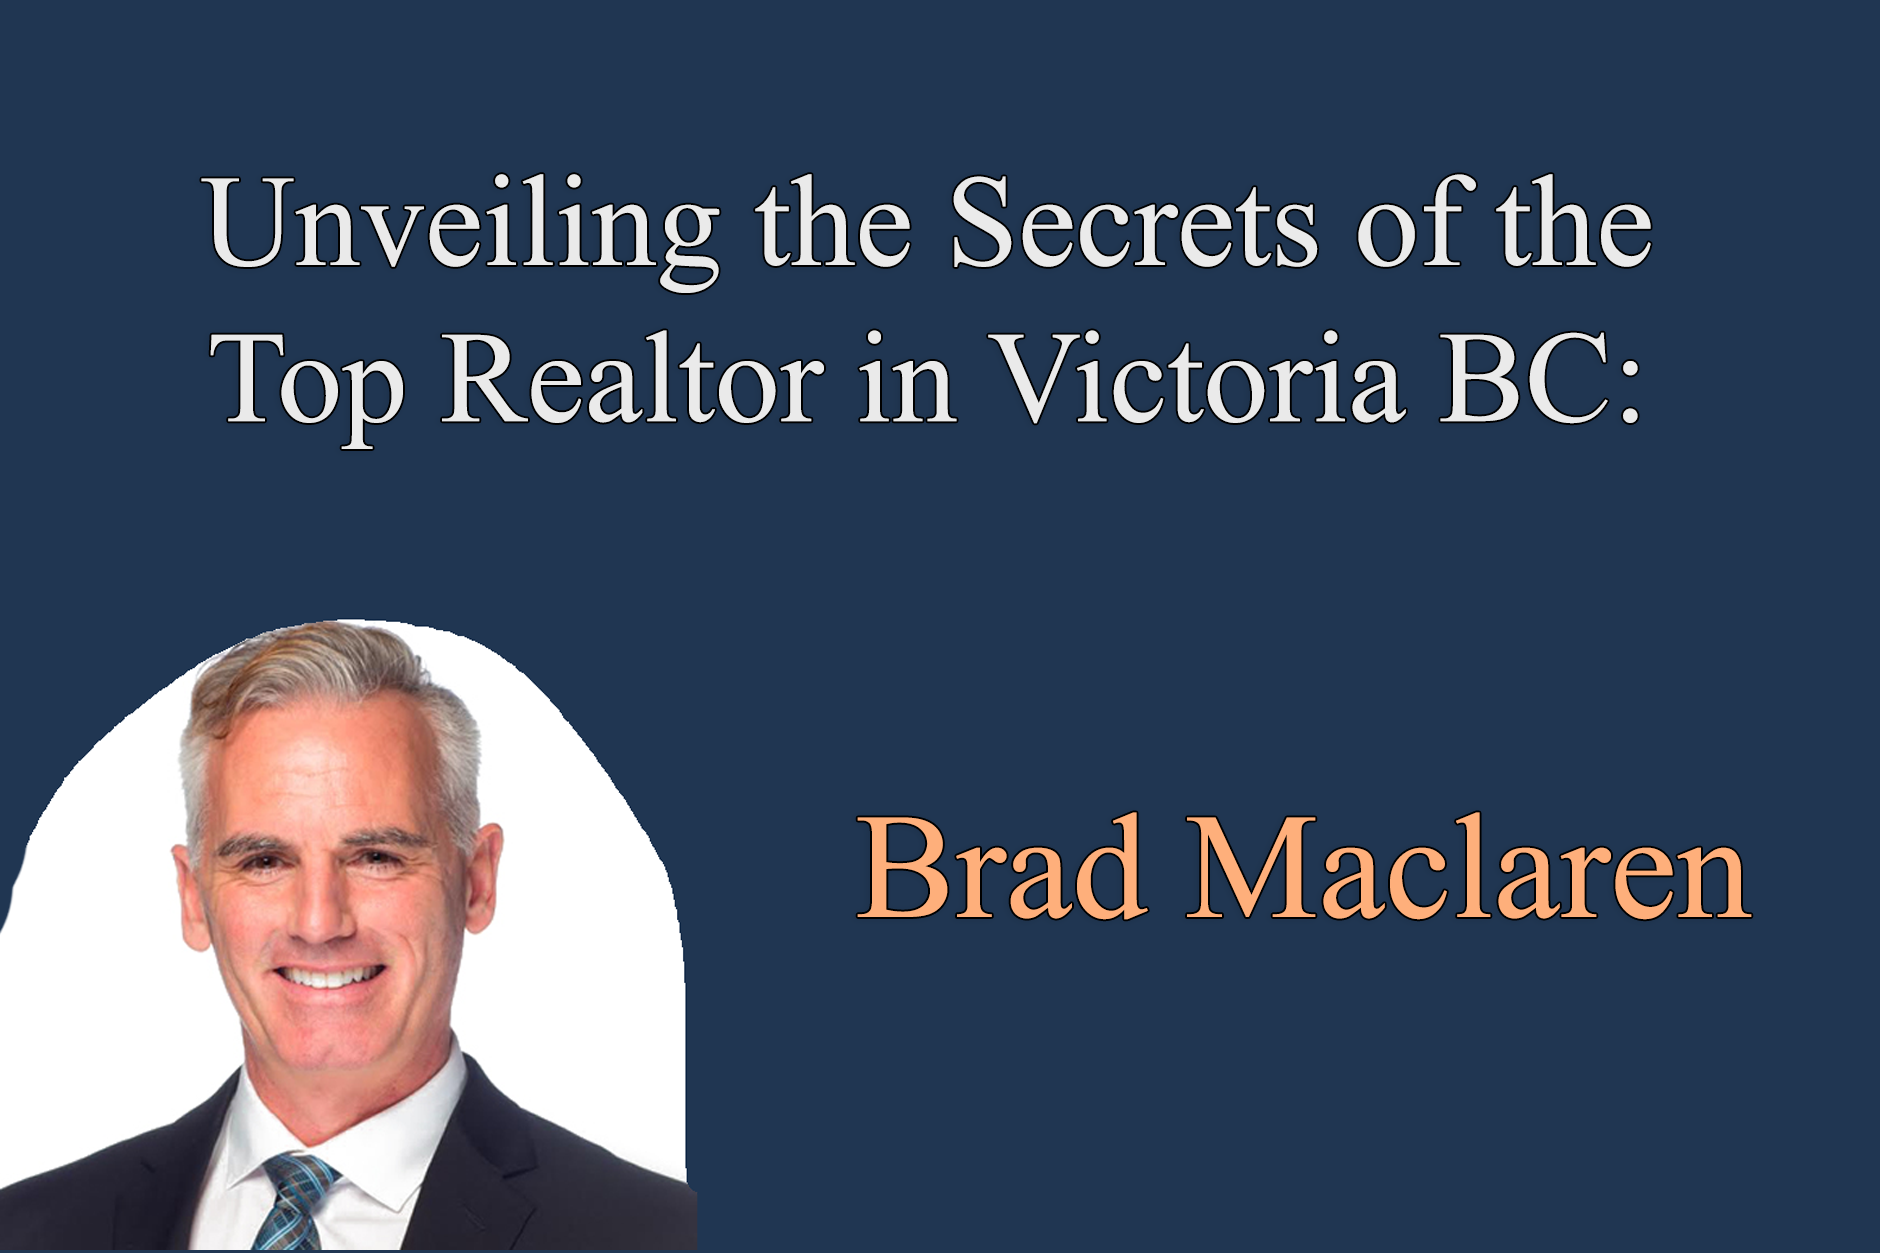 Unveiling the secrets of the top realtor in Victoria BC: Brad Maclaren